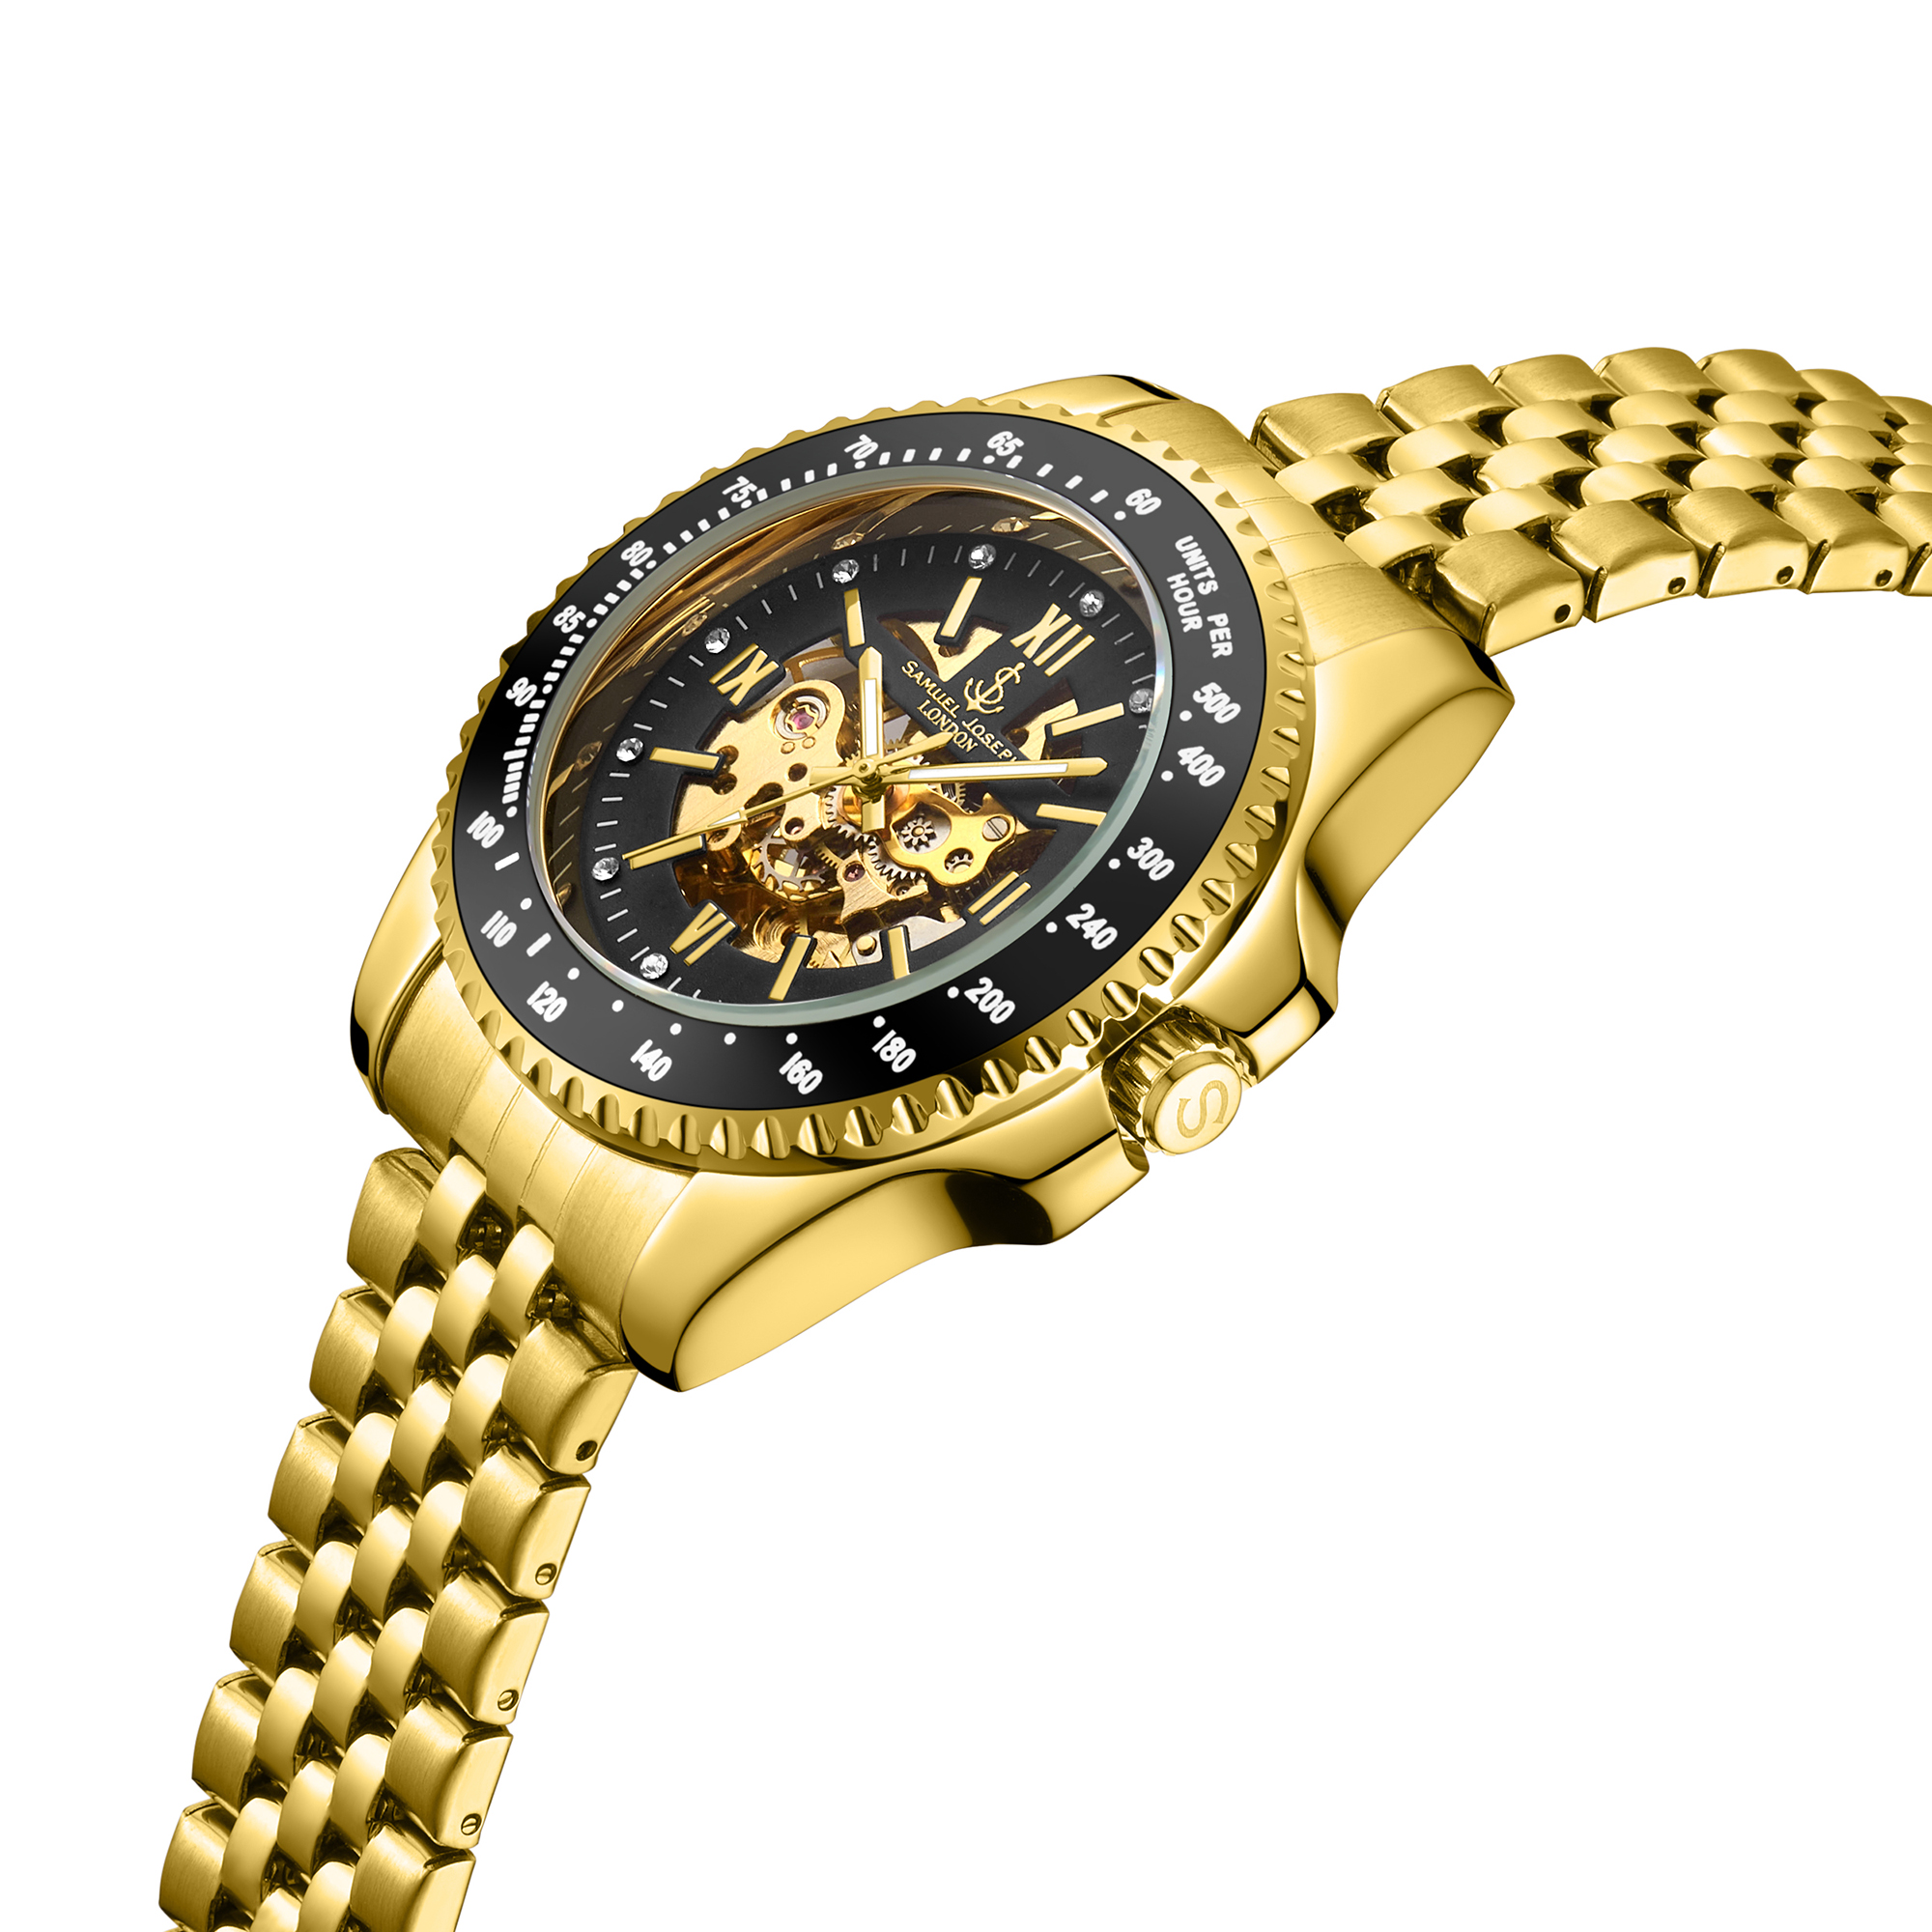 Samuel Joseph Limited Edition Skeleton Mechanism Gold Watch - Free Delivery & 2 Year Warranty - Image 3 of 5